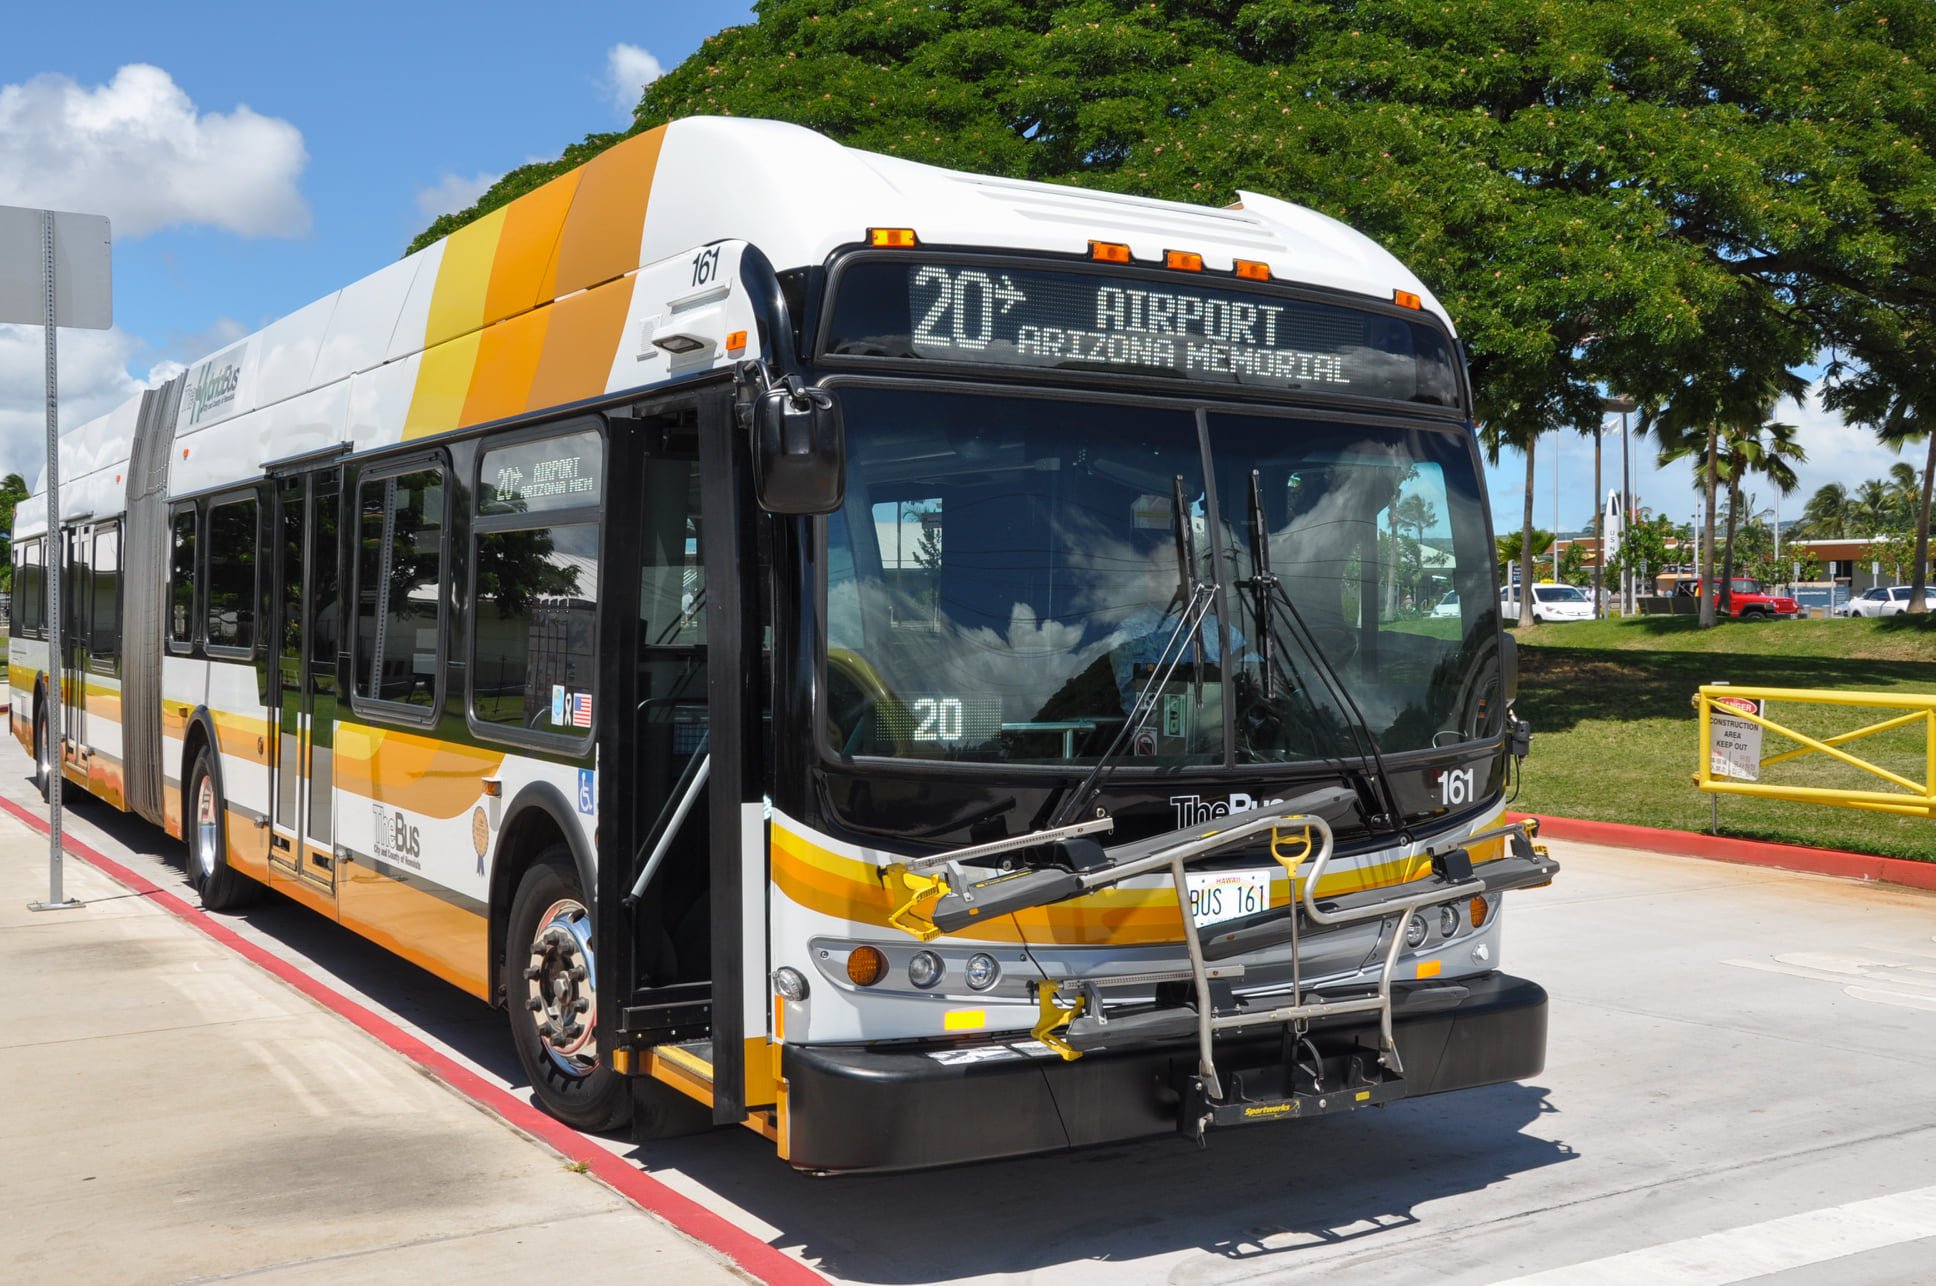 How To Get From Honolulu Airport To Downtown - All Possible Ways, cheapest way from Honolulu airport to city center, Honolulu airport to city center, cheapest way from Honolulu airport to downtown, Honolulu airport to downtown, Honolulu Airport Bus, honolulu airport to Pearl Harbor